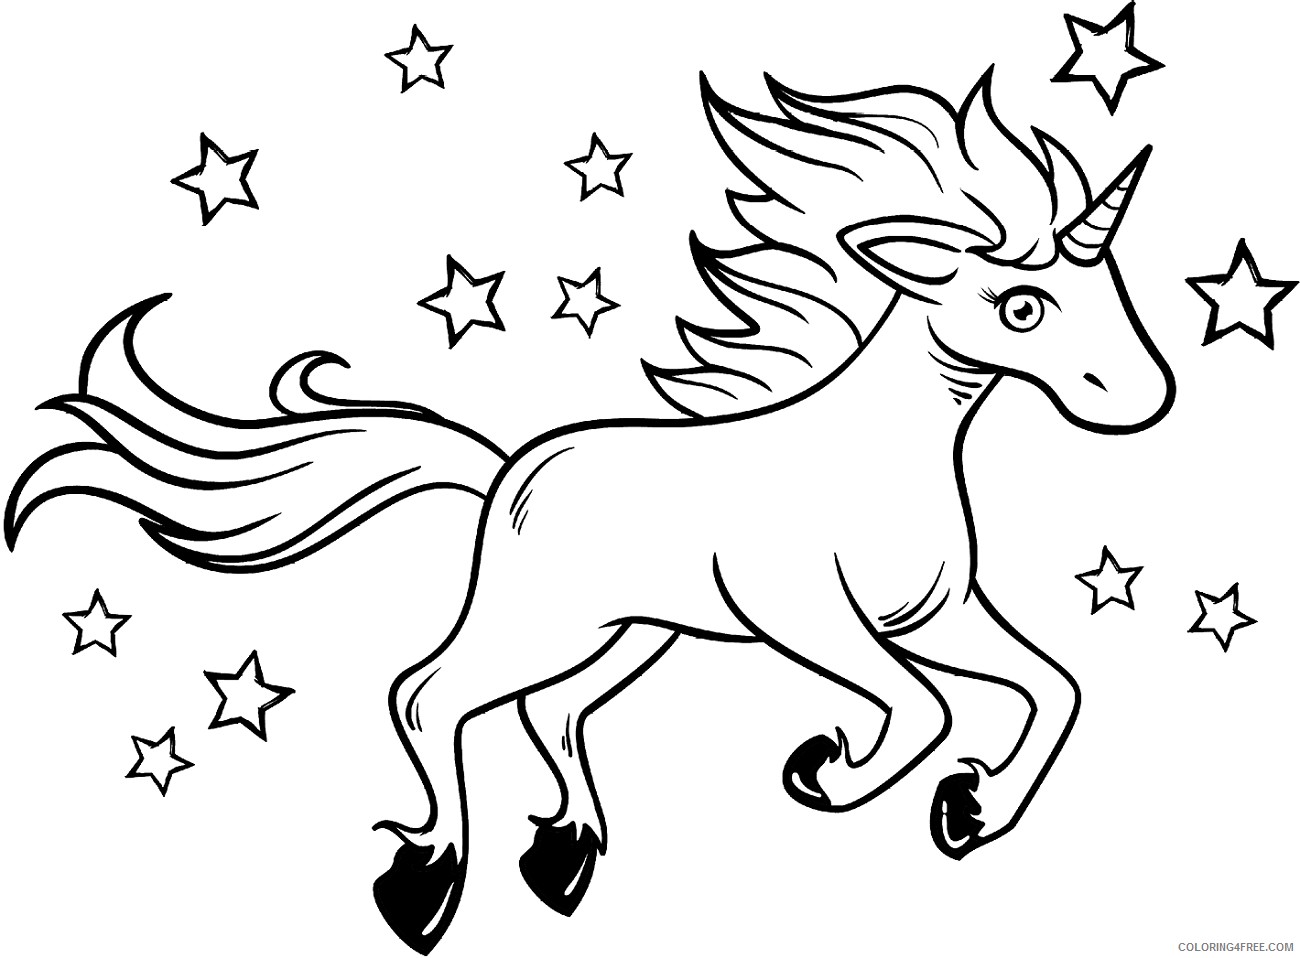 Unicorn Coloring Pages unicorn_and_stars Printable 2021 6052 Coloring4free